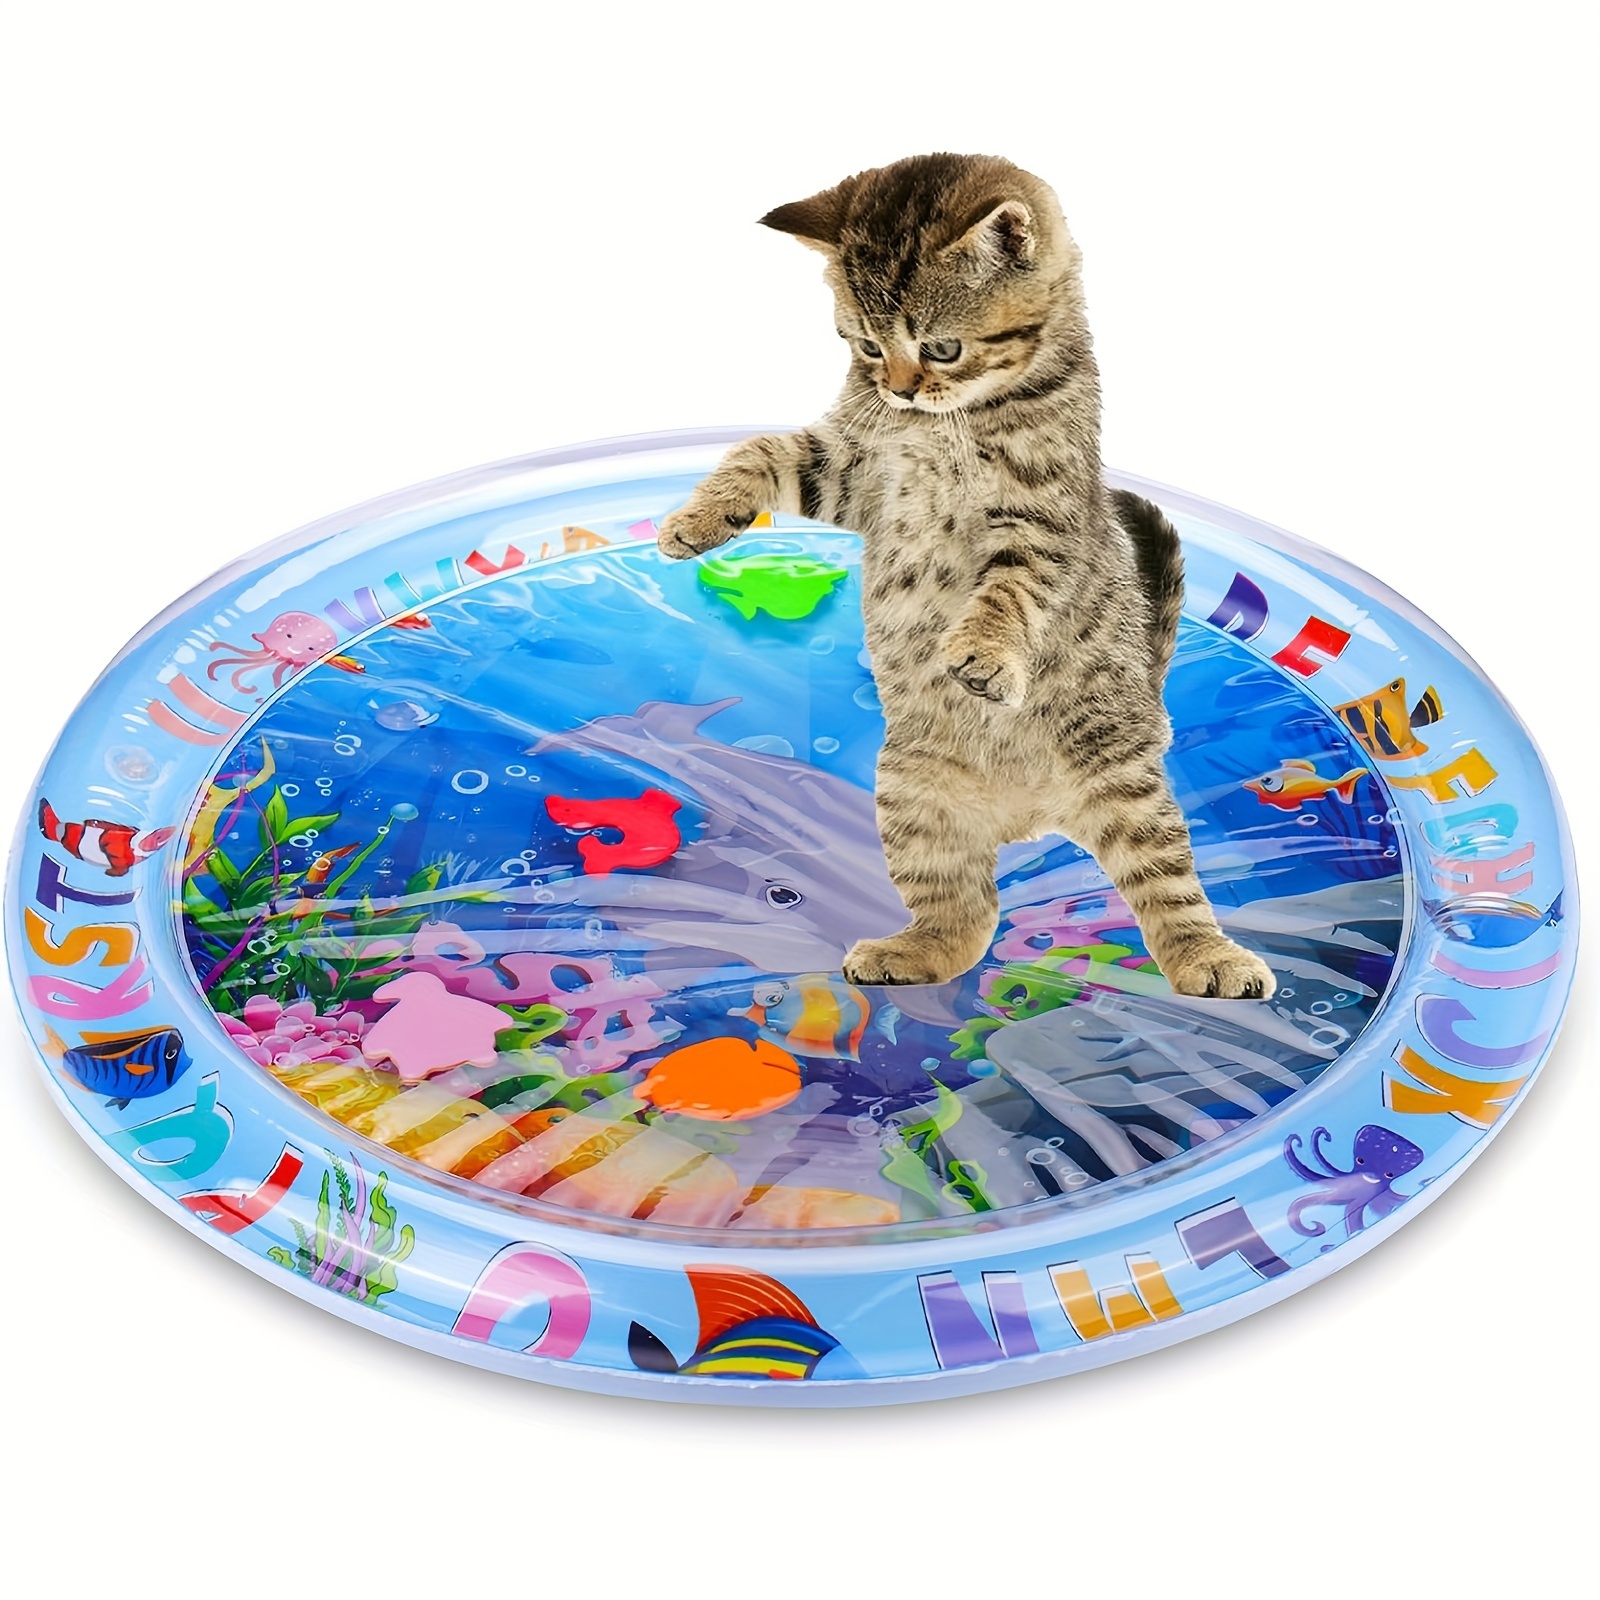 

Interactive Water Sensation Cat Play Mat, Boredom Pvc Pad For Indoor Cats, Splash-proof Feline Kick Toy With Floating Fish Design, Use With Tap Water